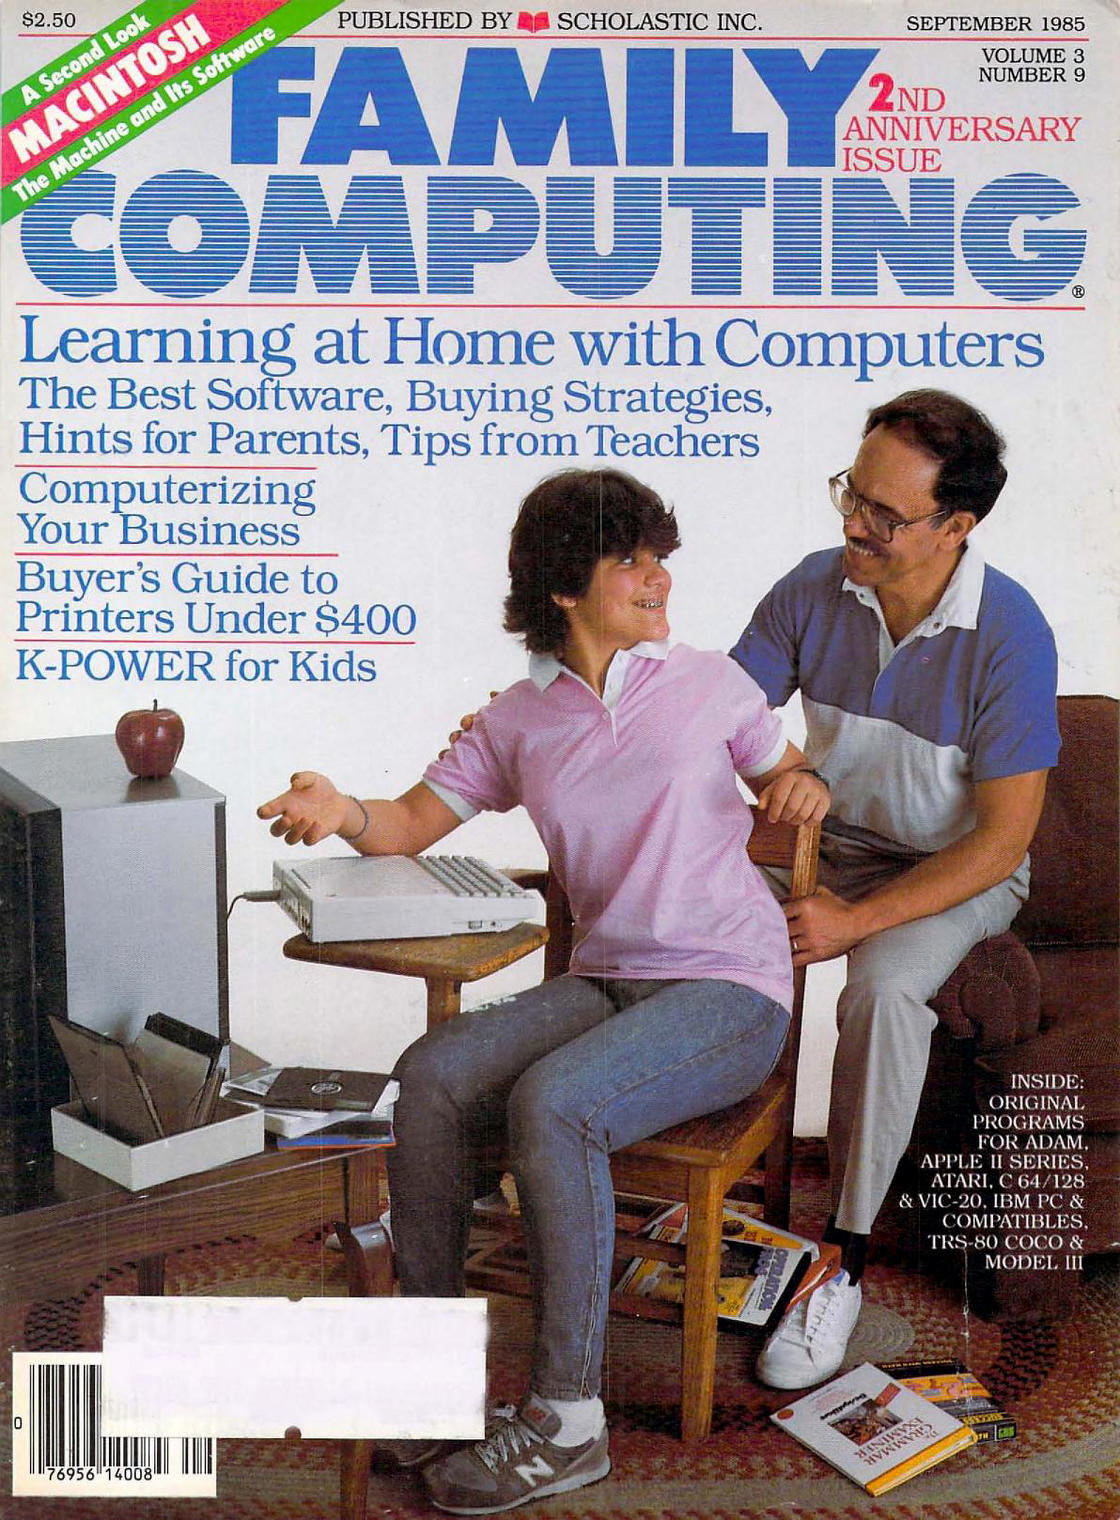 cool 90's computer ad - $2.50 Published By Le Scholastic Inc. Volume 3 Number 9 2ND A Second Look Macintosh The Machine and its Software Anniversary Issue Cofa Muiync Learning at Home with Computers The Best Software, Buying Strategies, Hints for Parents,